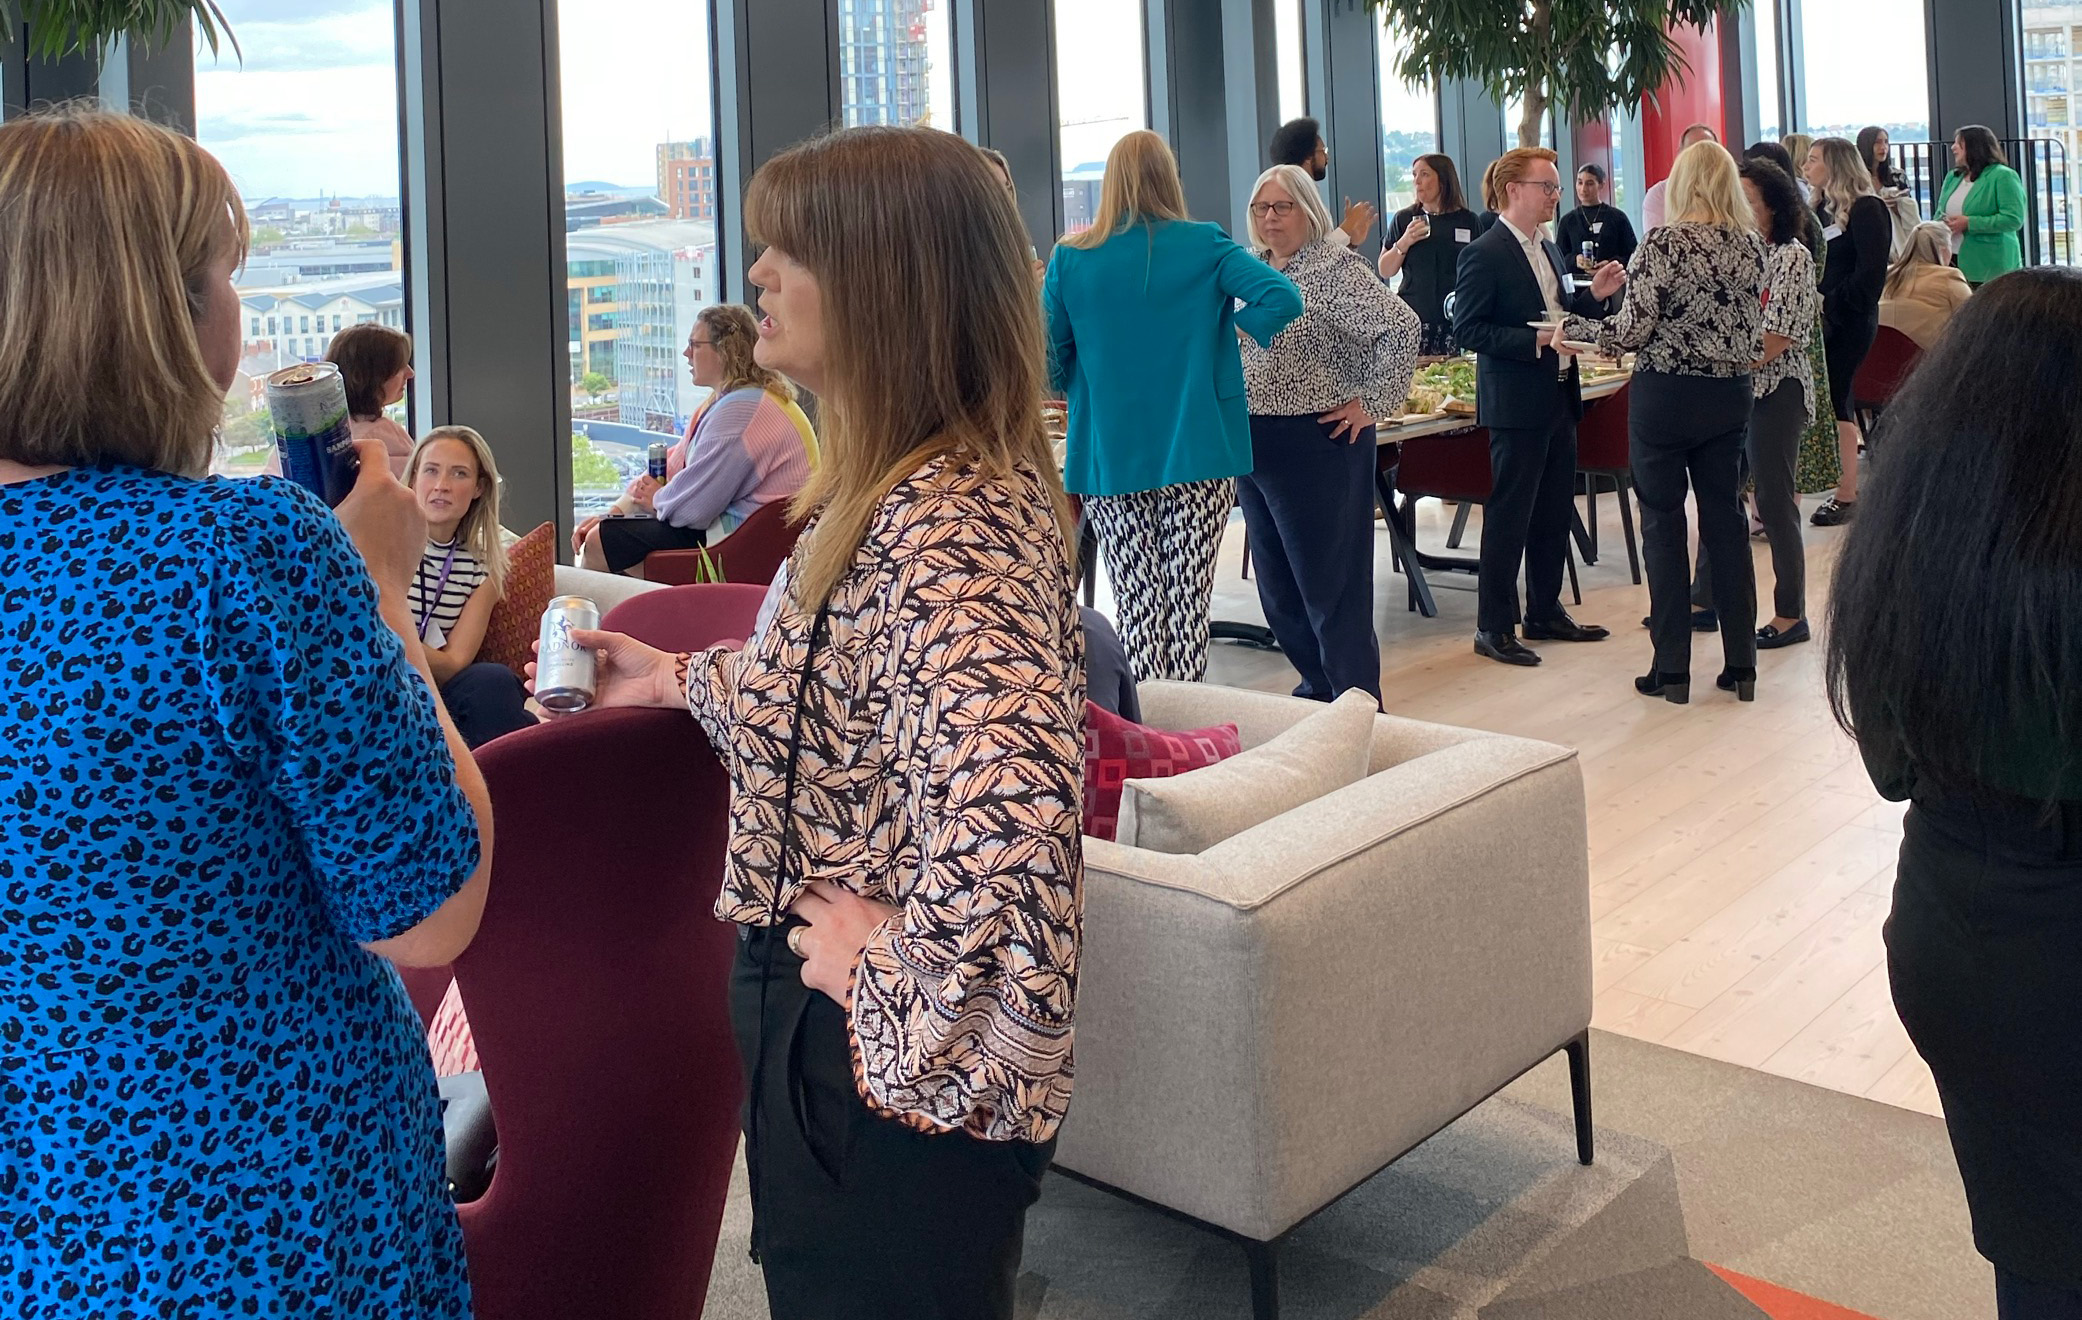 Attendees of the the NatWest "Powering up your future" event held at the Hugh James 2 Central Square headquarters gather in the office's Vista longue for drinks and a buffet